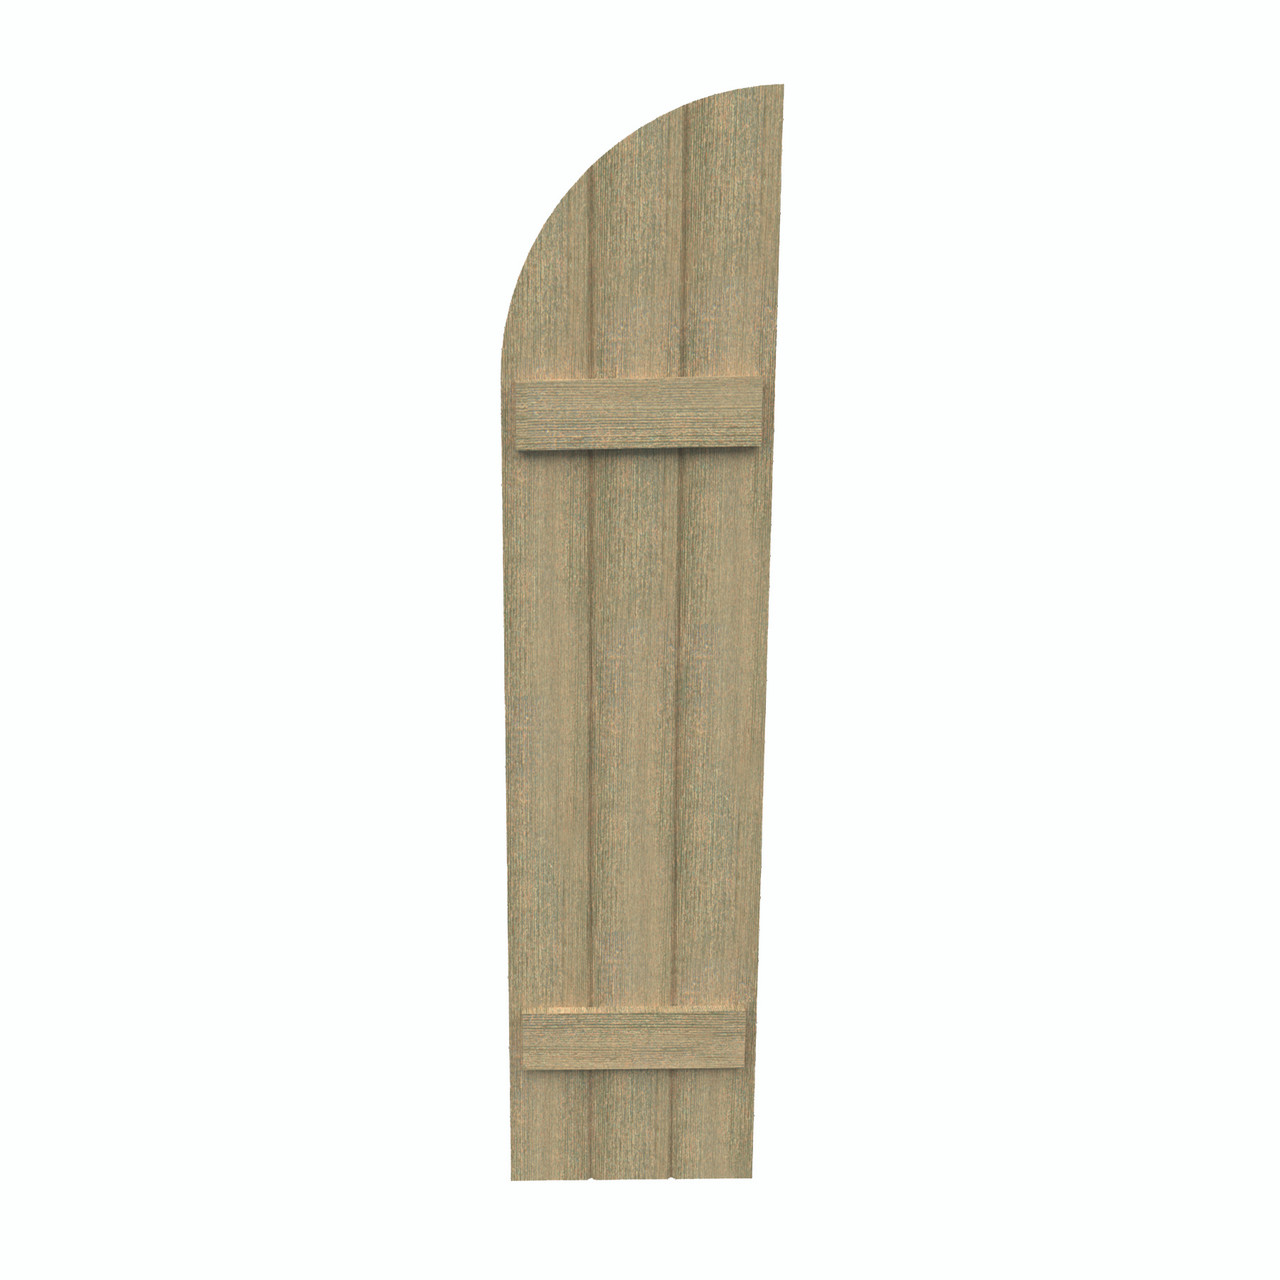 14 inch by 115 inch Quarter Round Shutter with 3-Boards